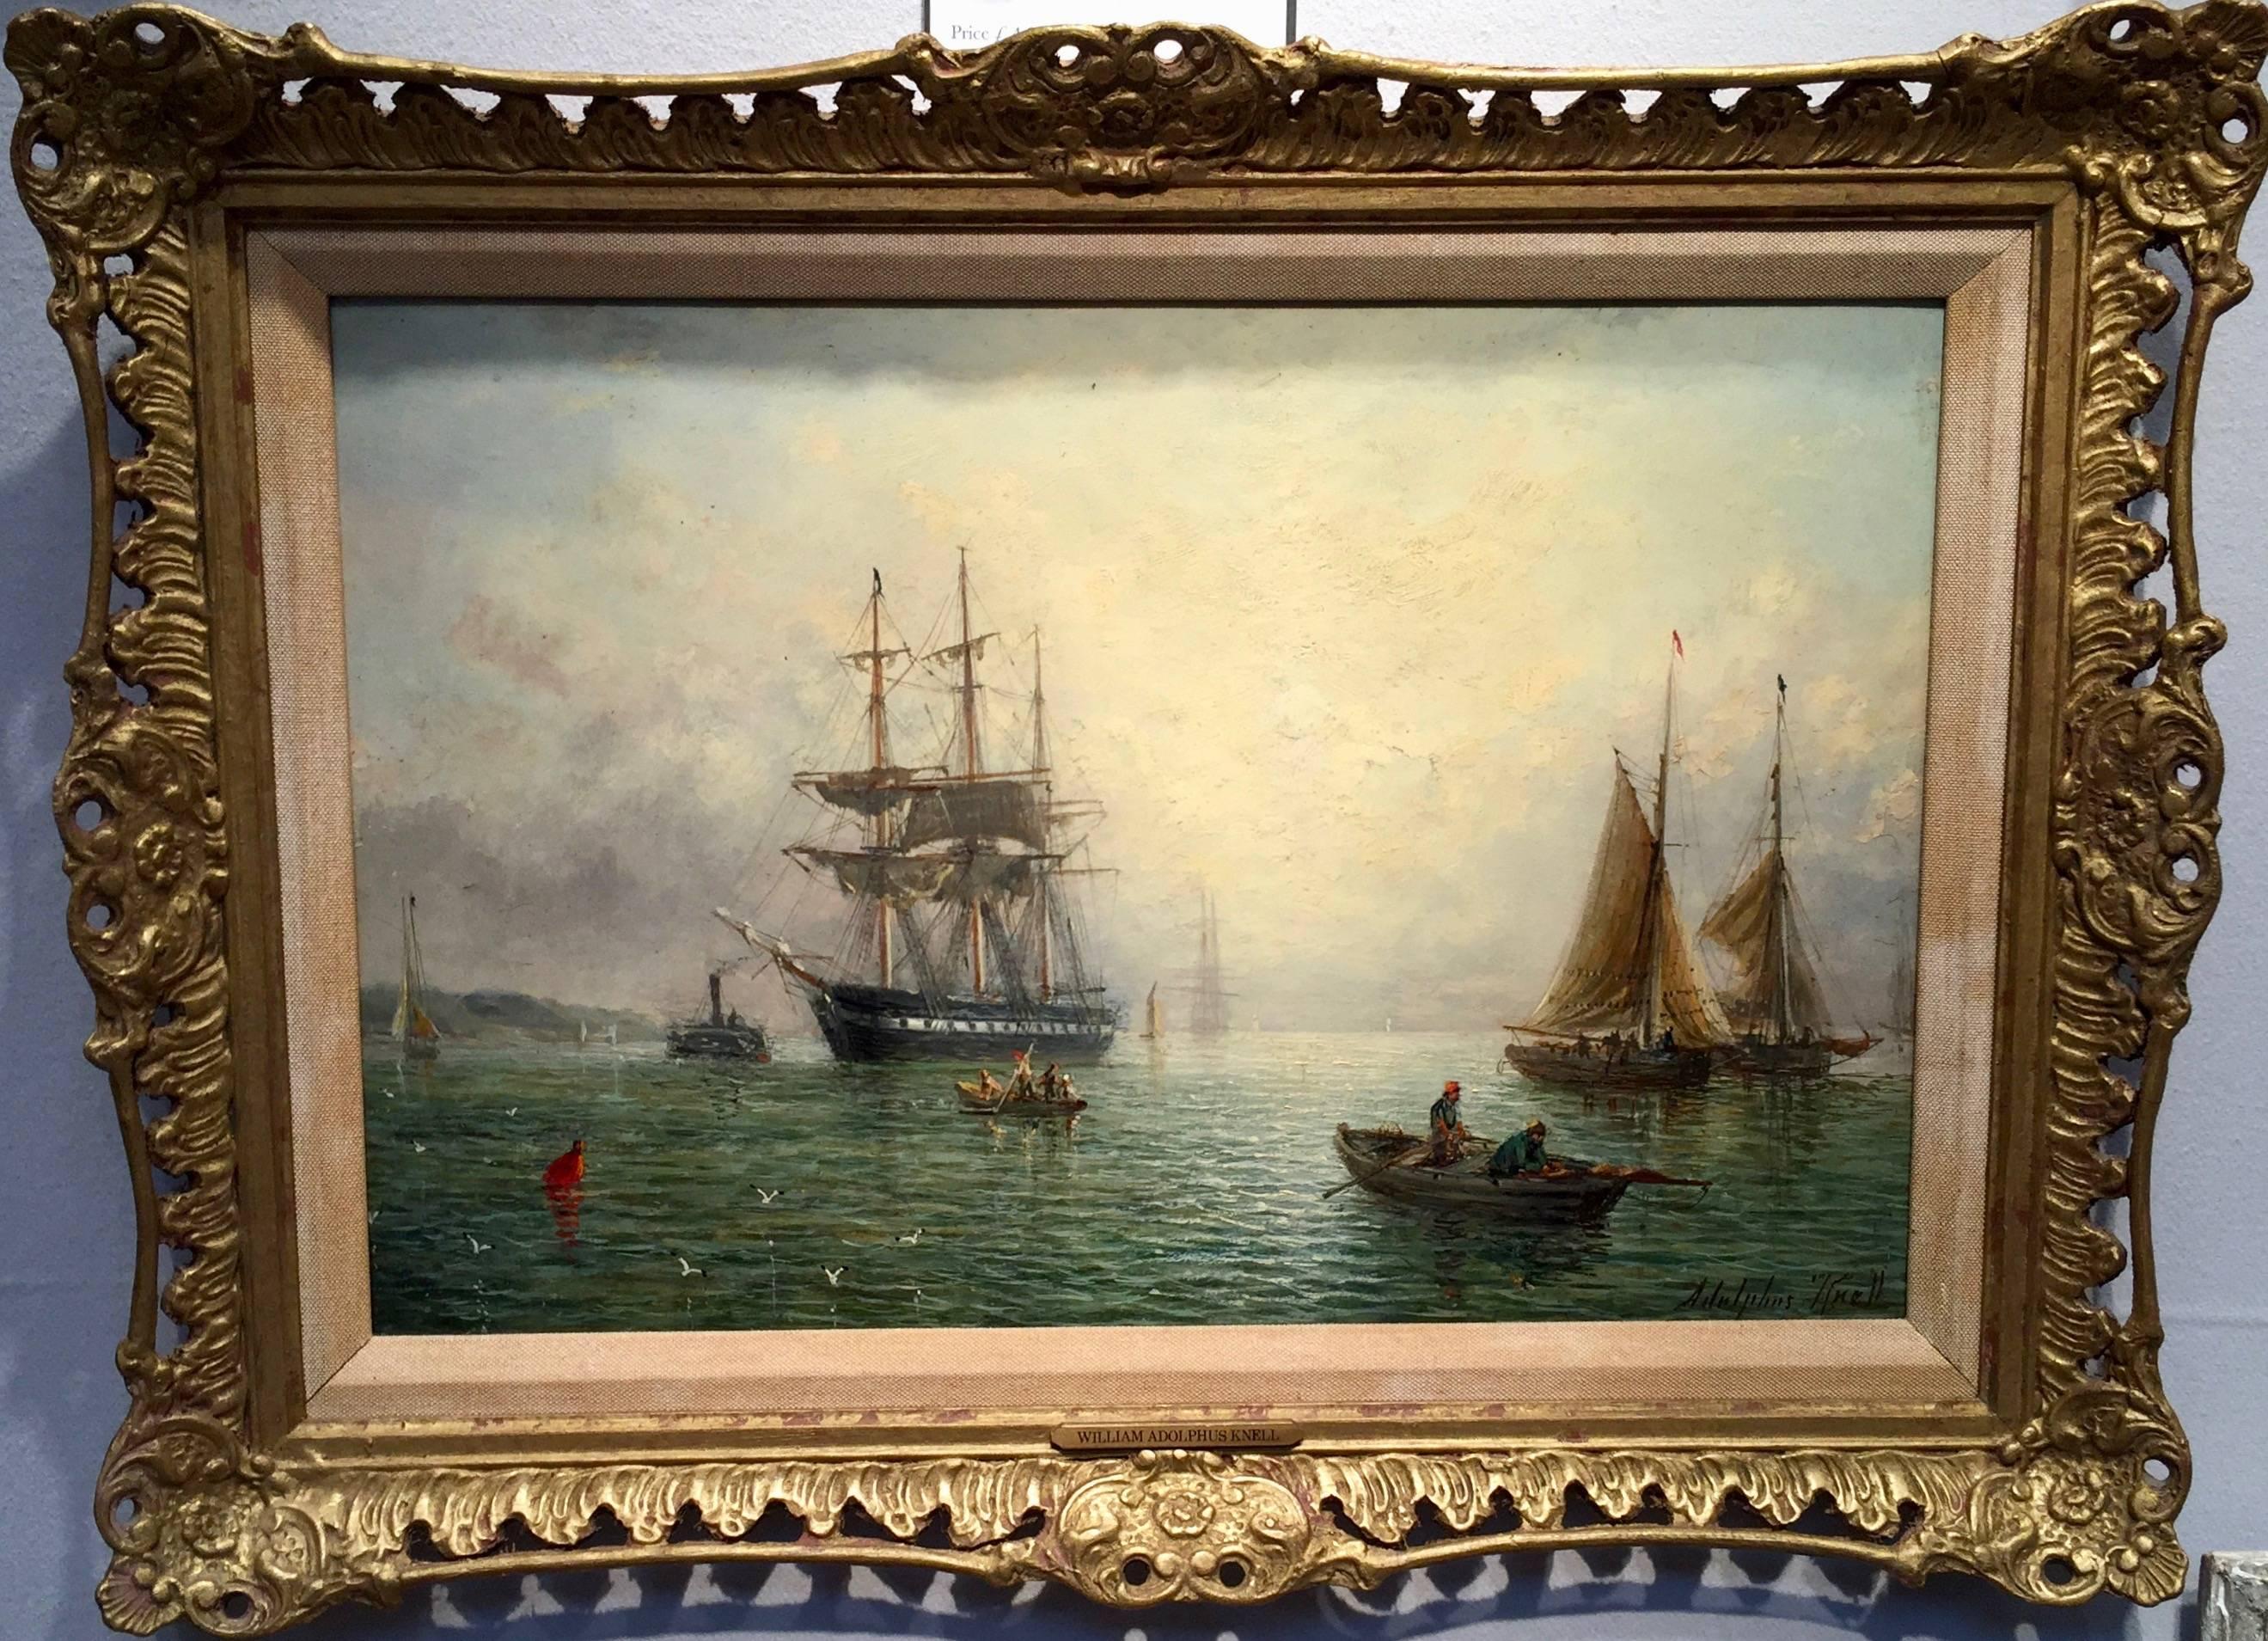 Impressionist English marine scene - Painting by Adolphus Knell